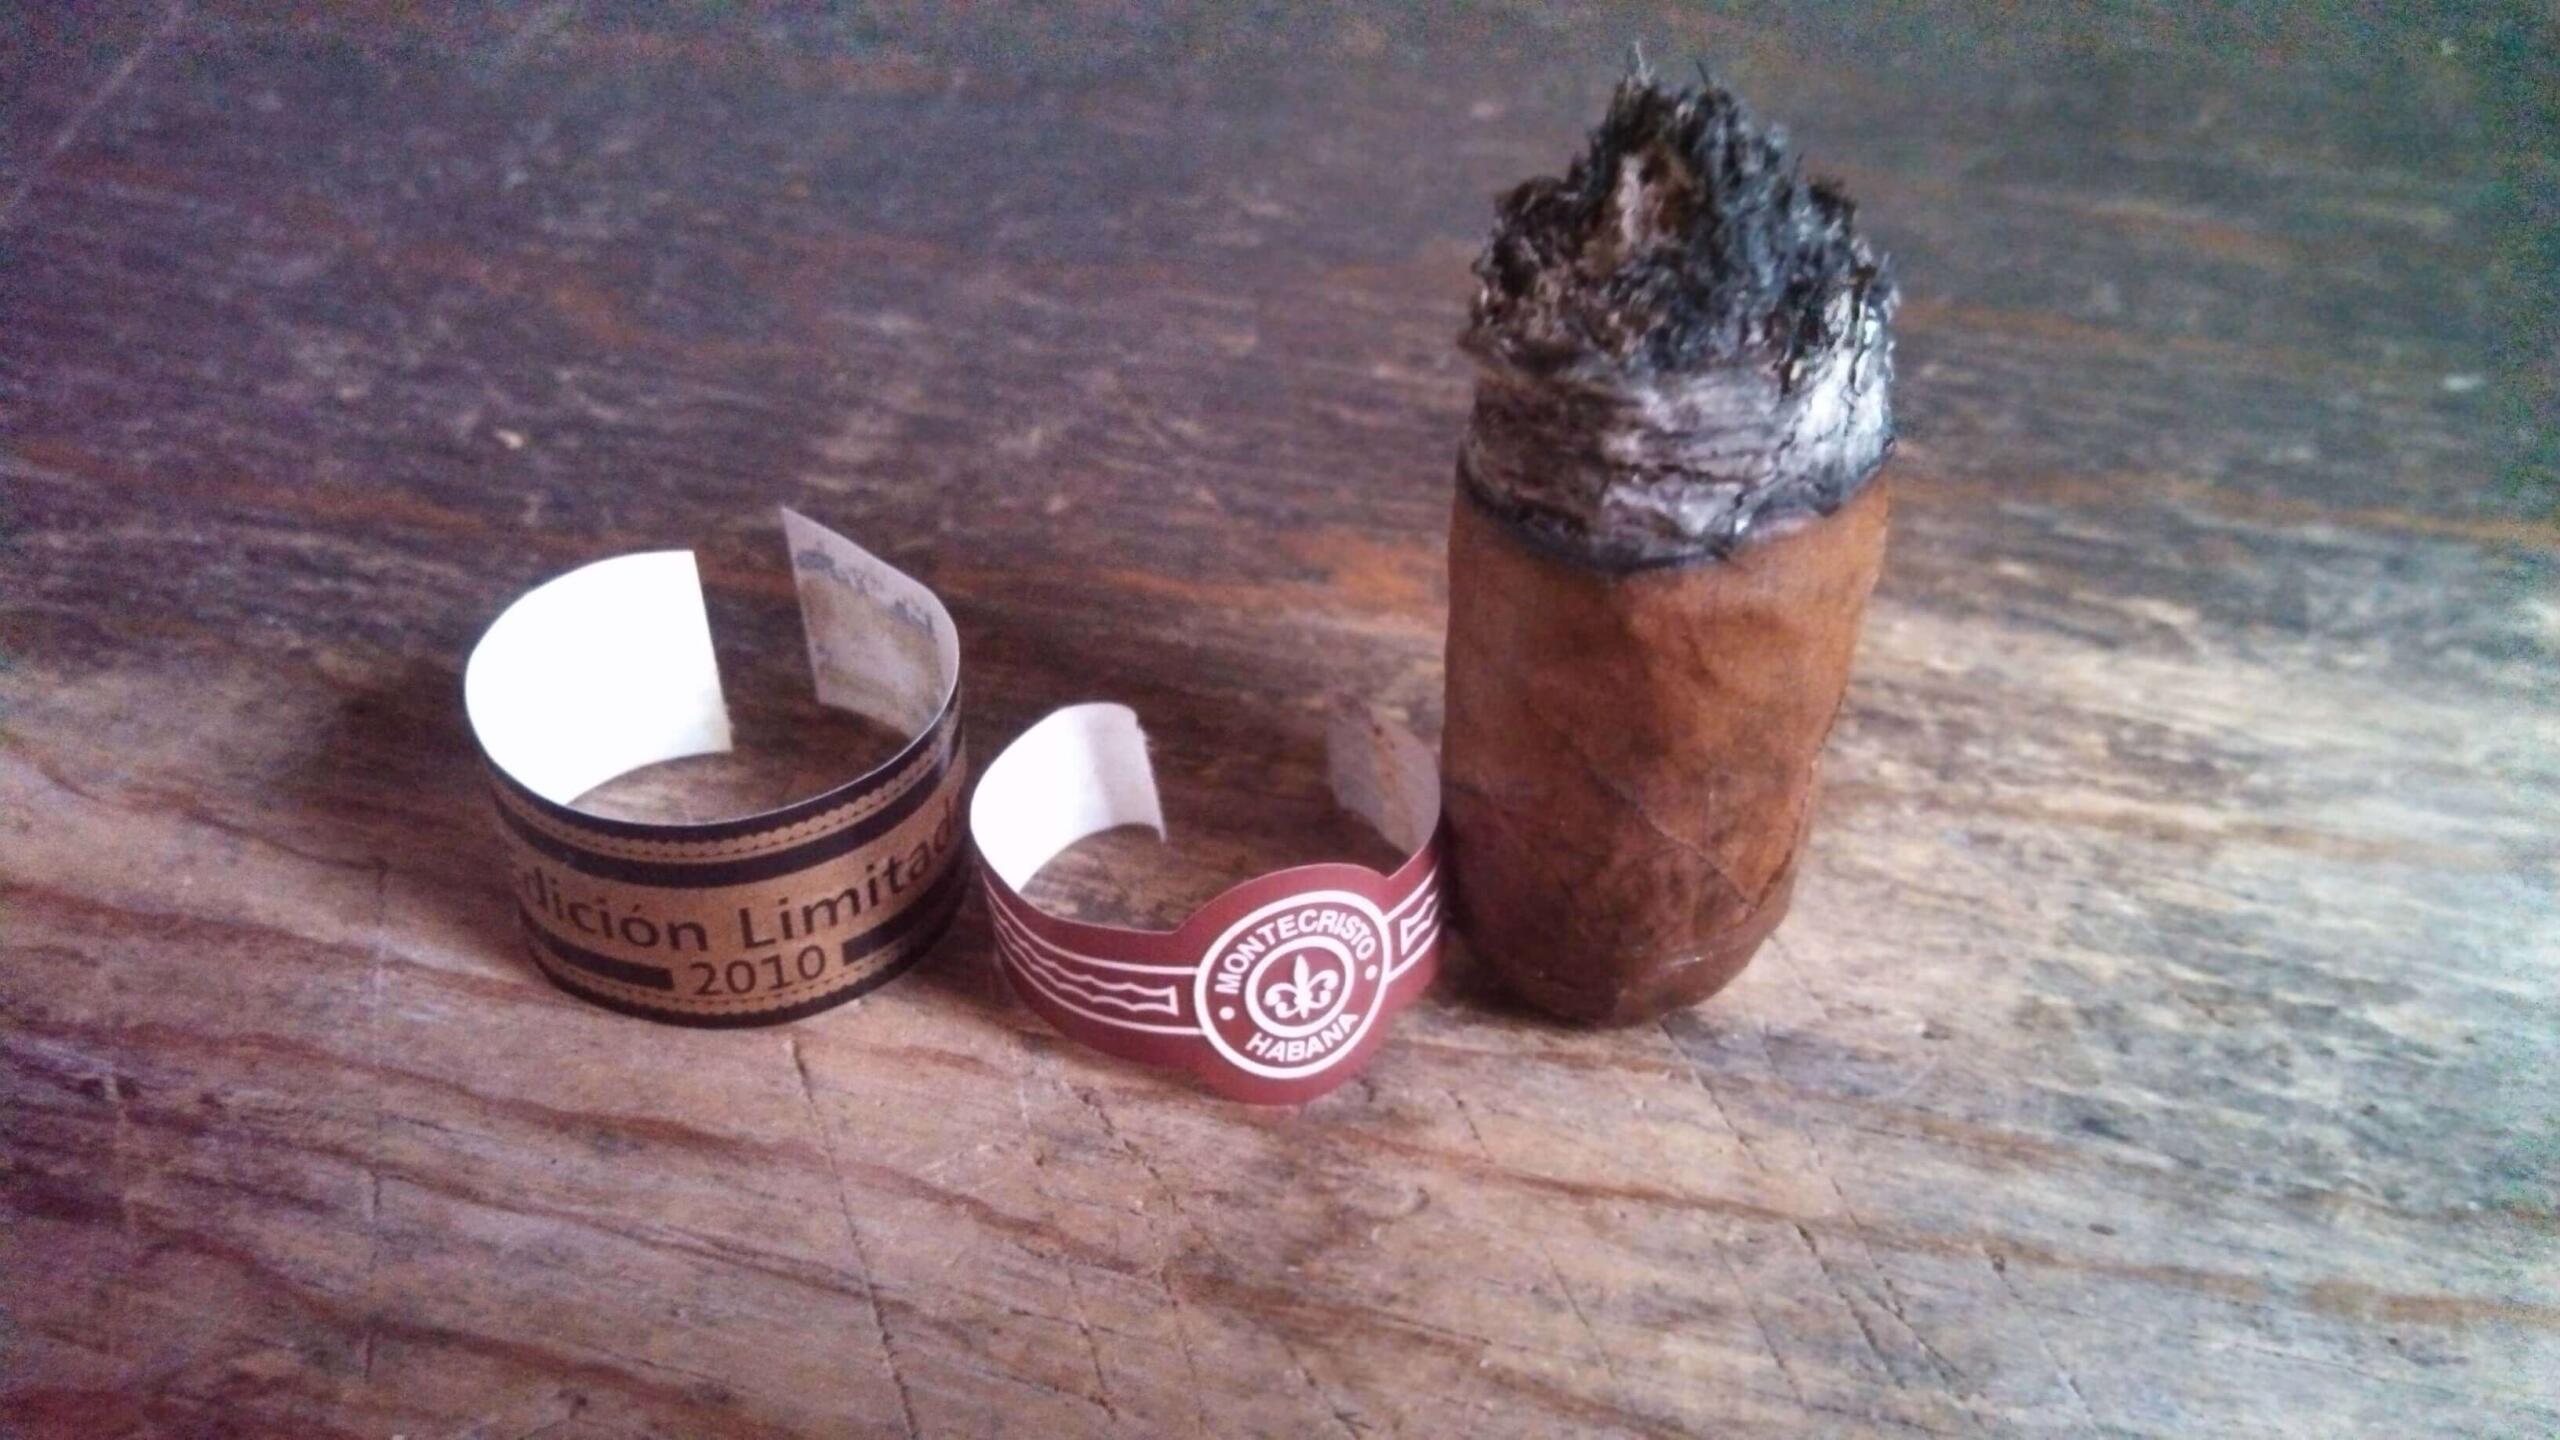 3 year old Montecristo Limited Edition